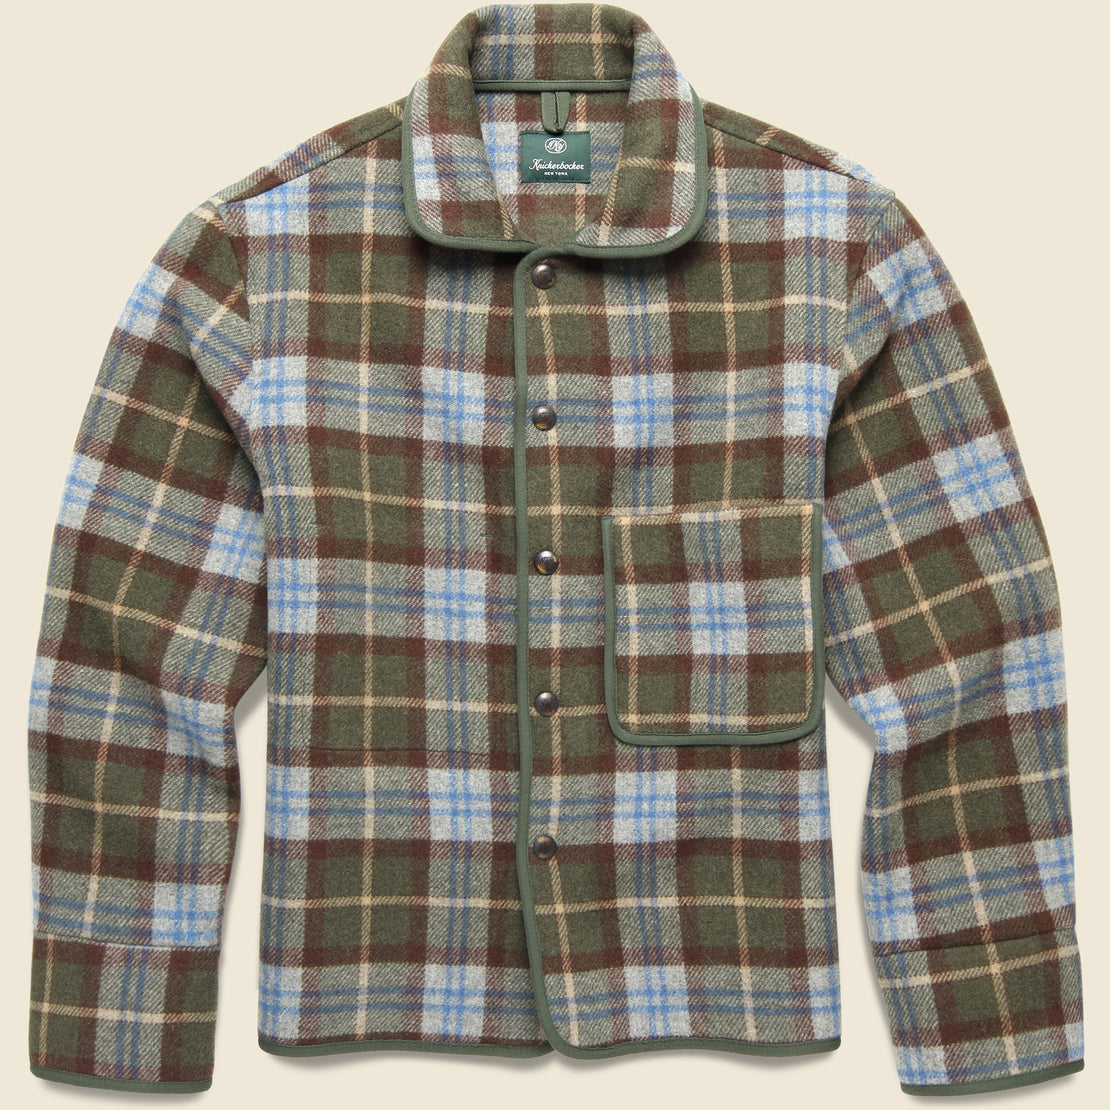 Hooded Plaid Jacket/Shirt – Wildflower Ranch Boutique